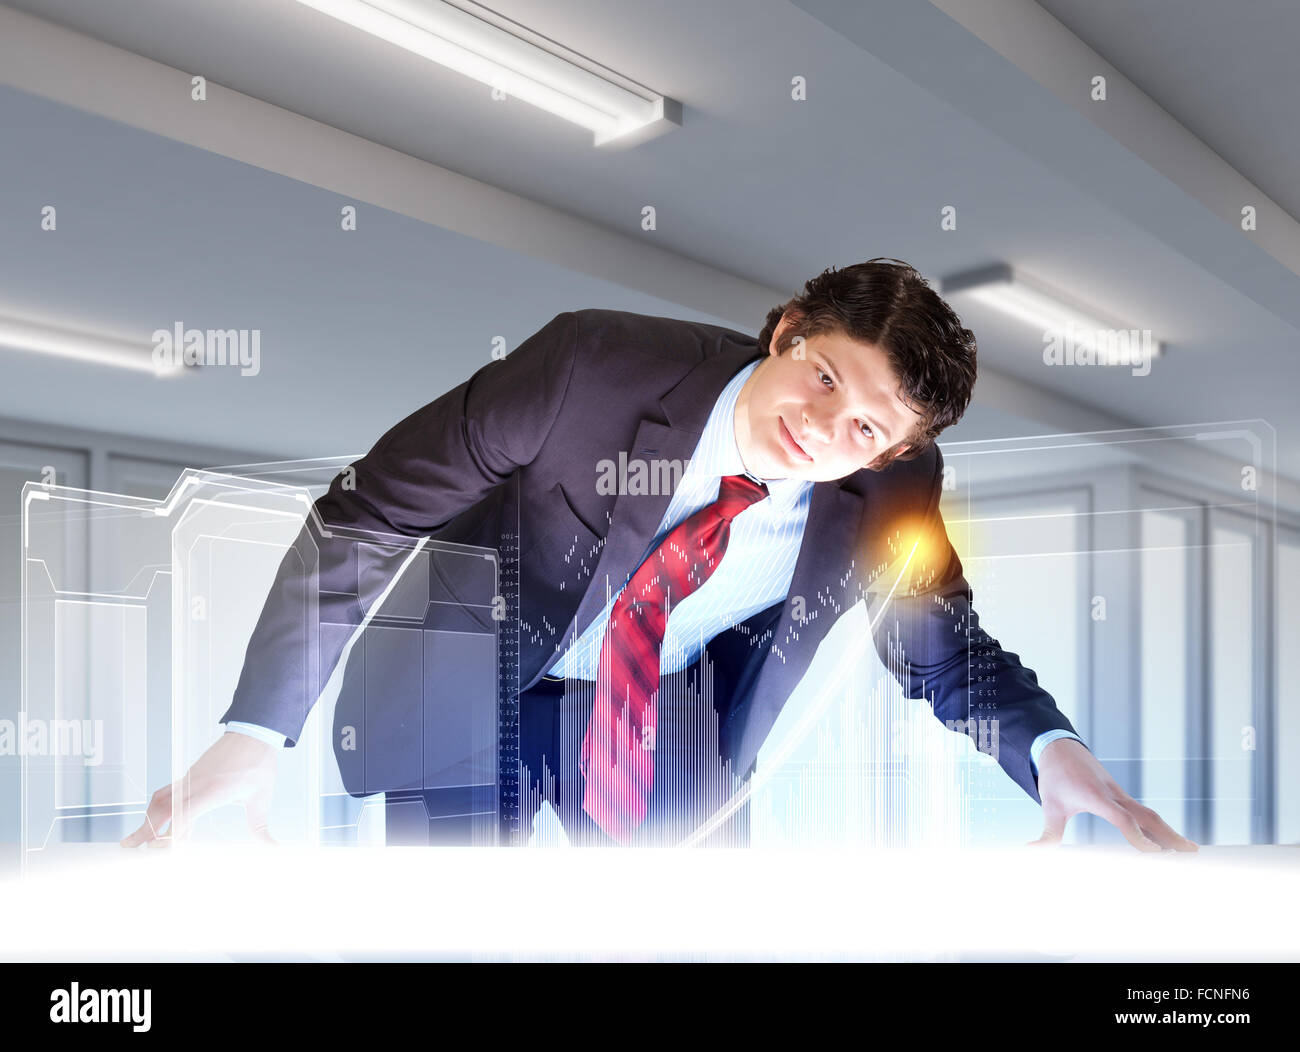 Image of young businessman looking at high-tech picture Stock Photo